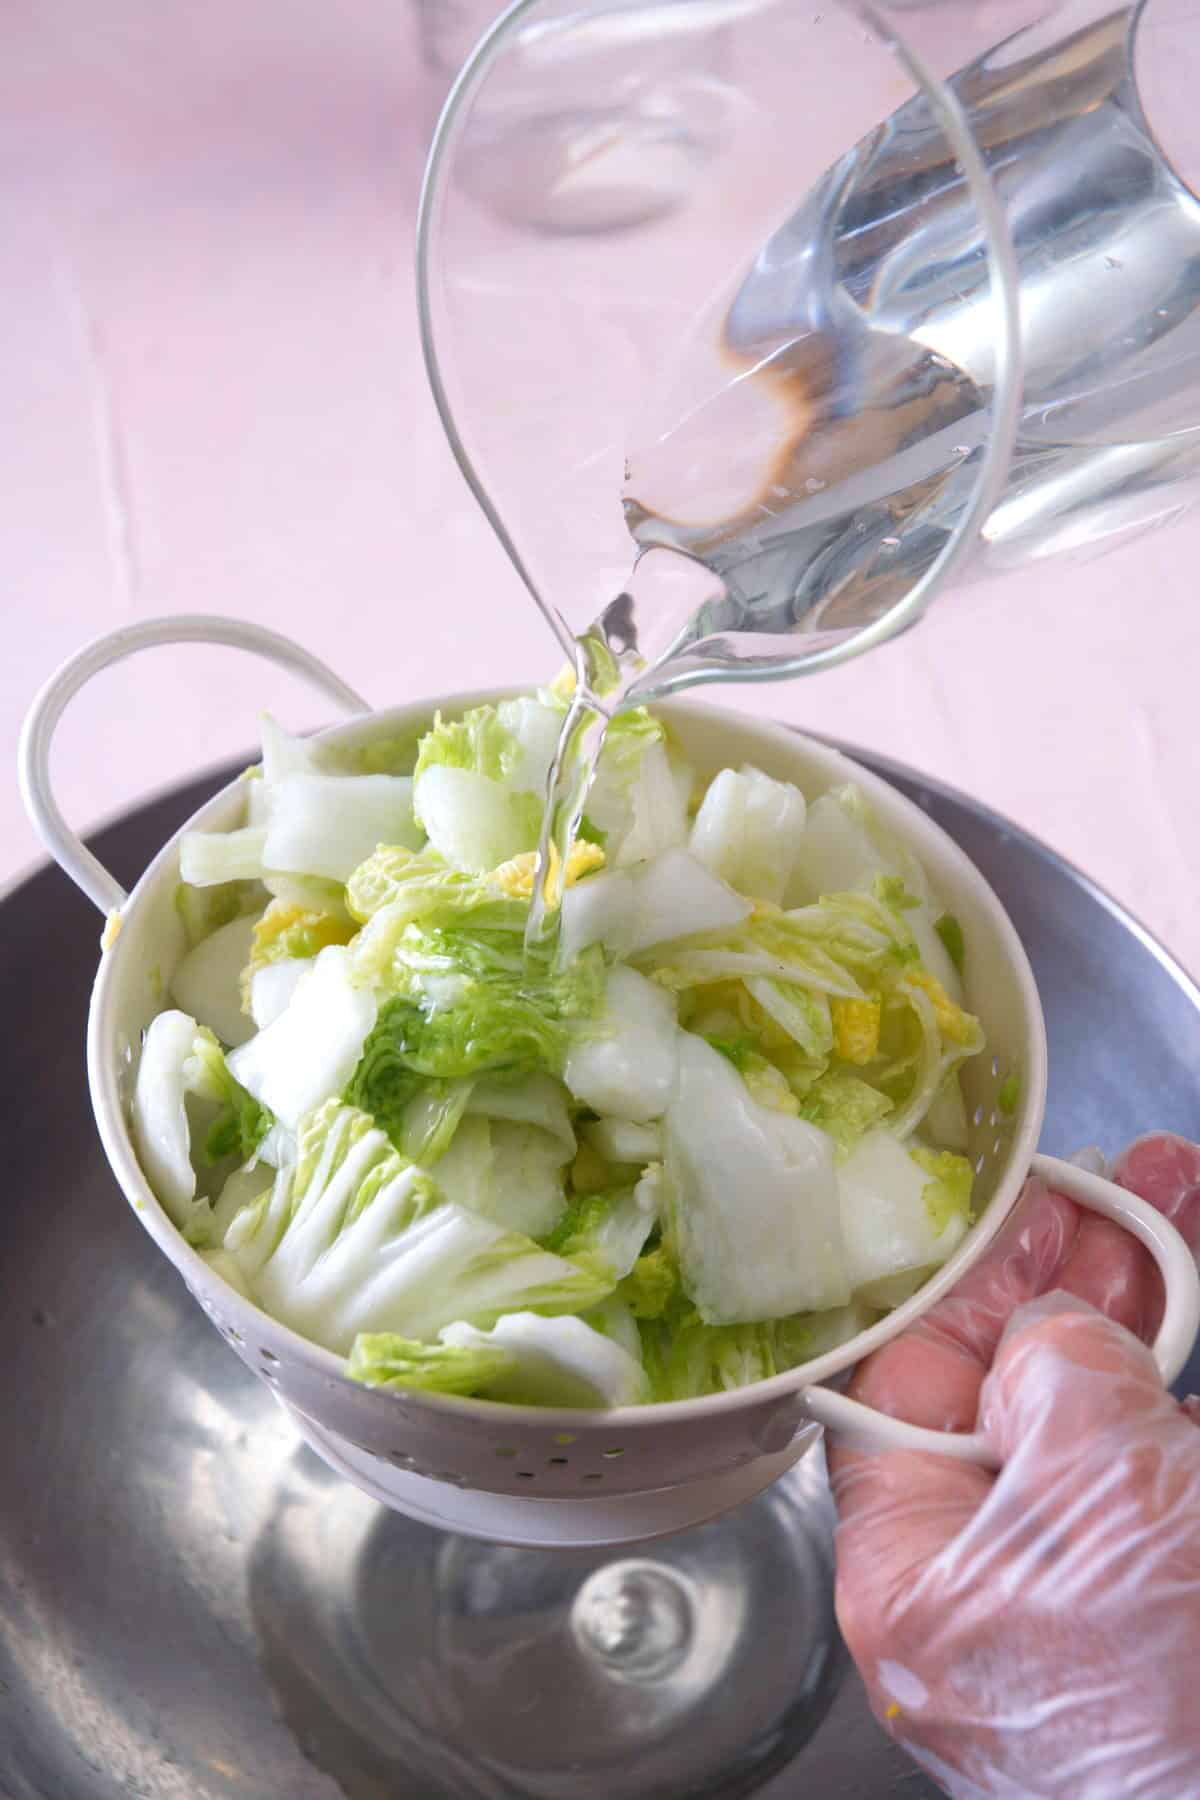 Chopped Napa cabbage in a colander with water running over it.